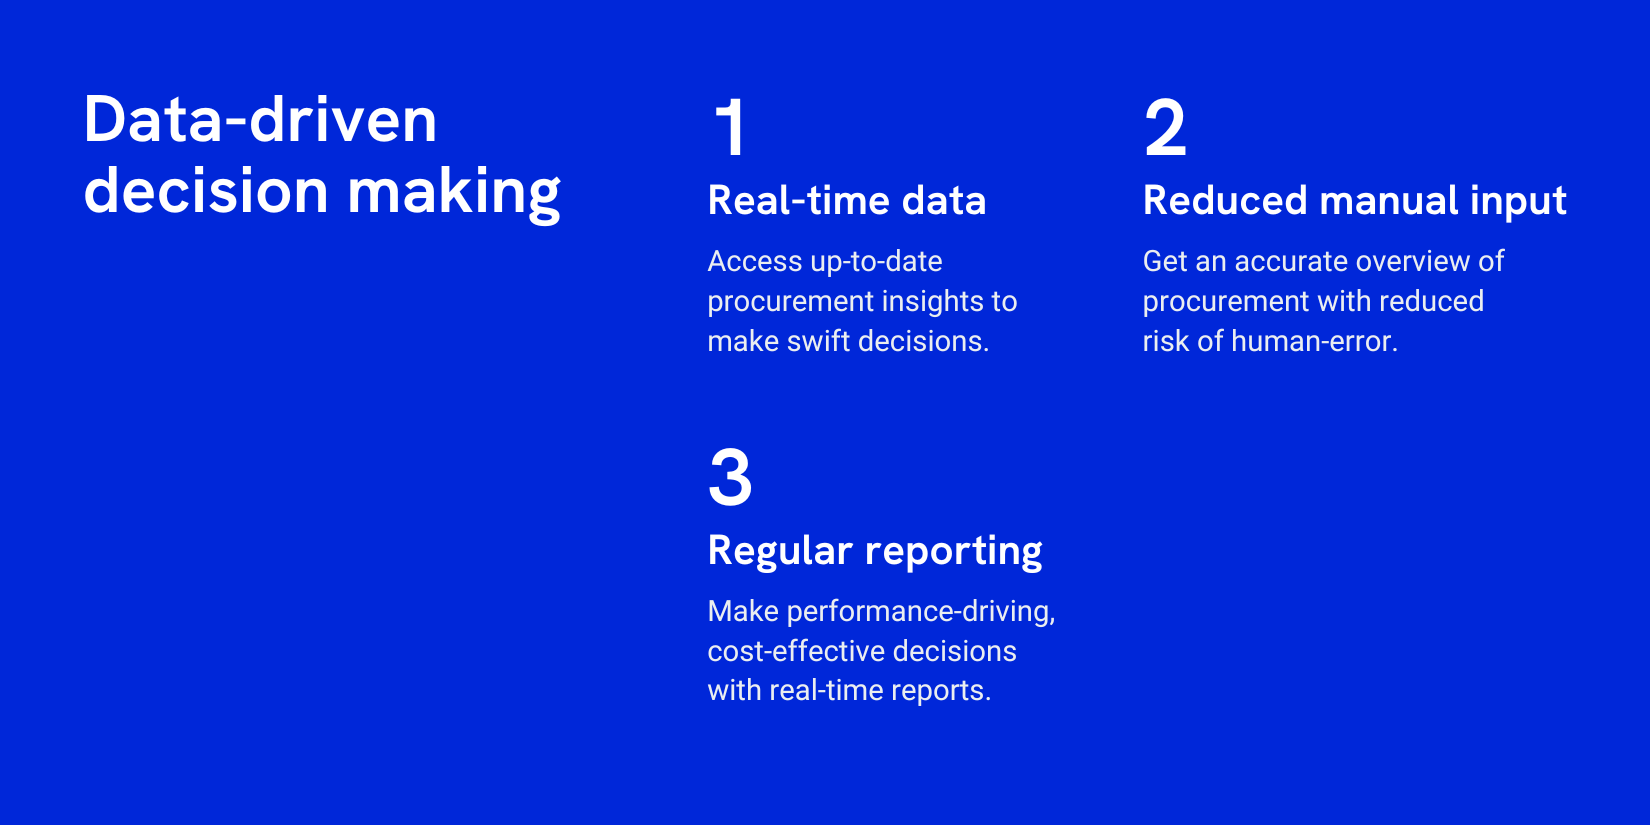 A graphic with a blue background, on the left the title 'Data-driven decision making' and on the right are three points, 1. Real-time data, 2. Reduced manual input and 3. Regular reporting.